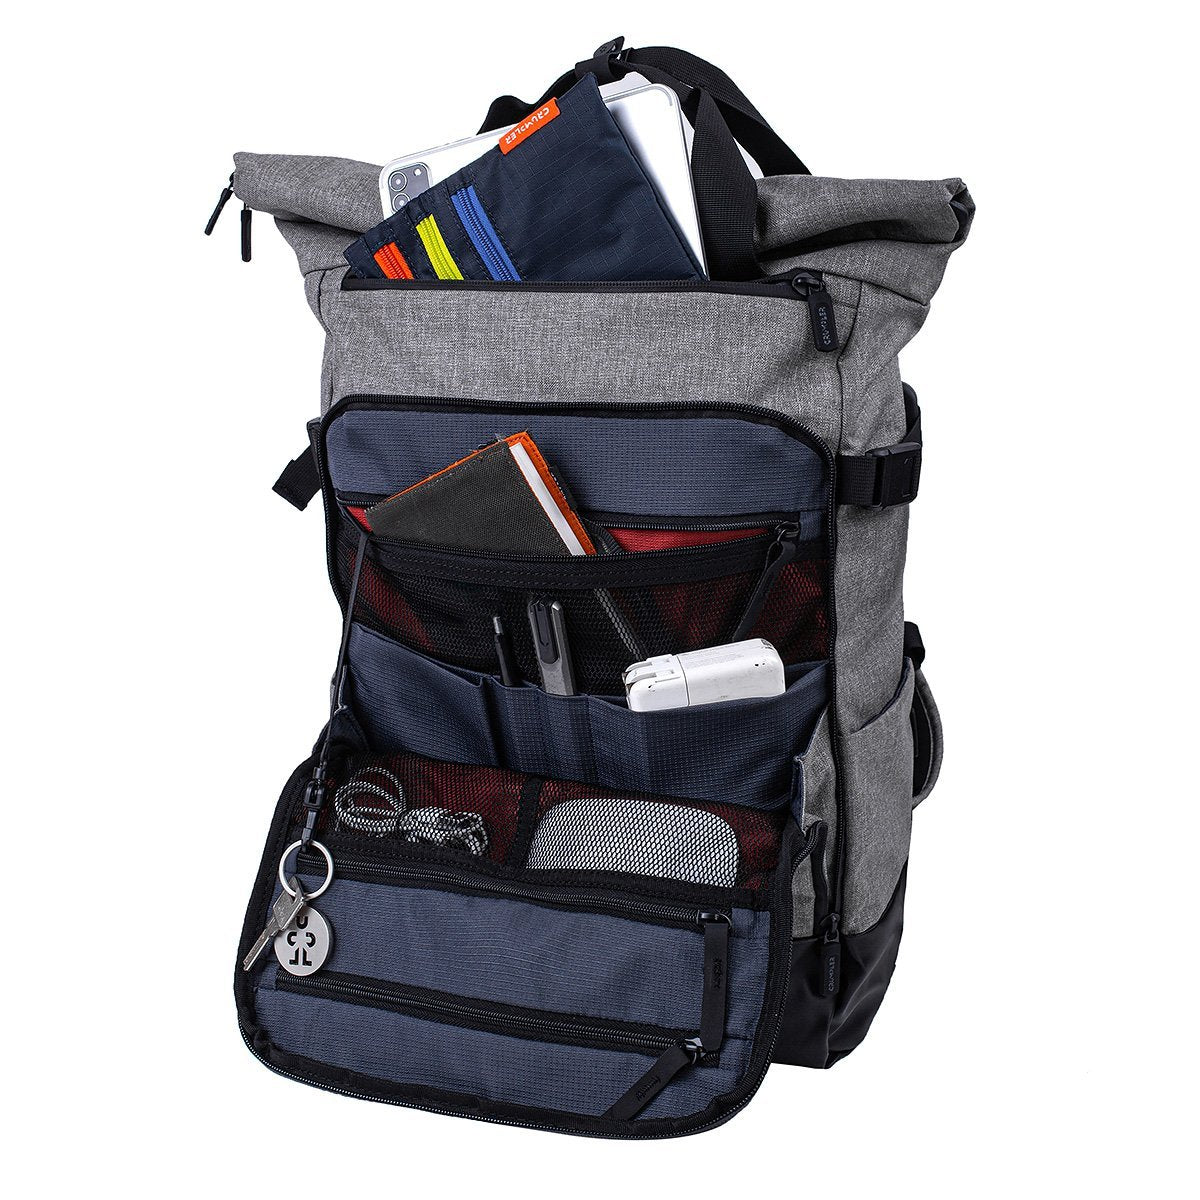 Crumpler Conversion Rolltop Backpack - #product-type#